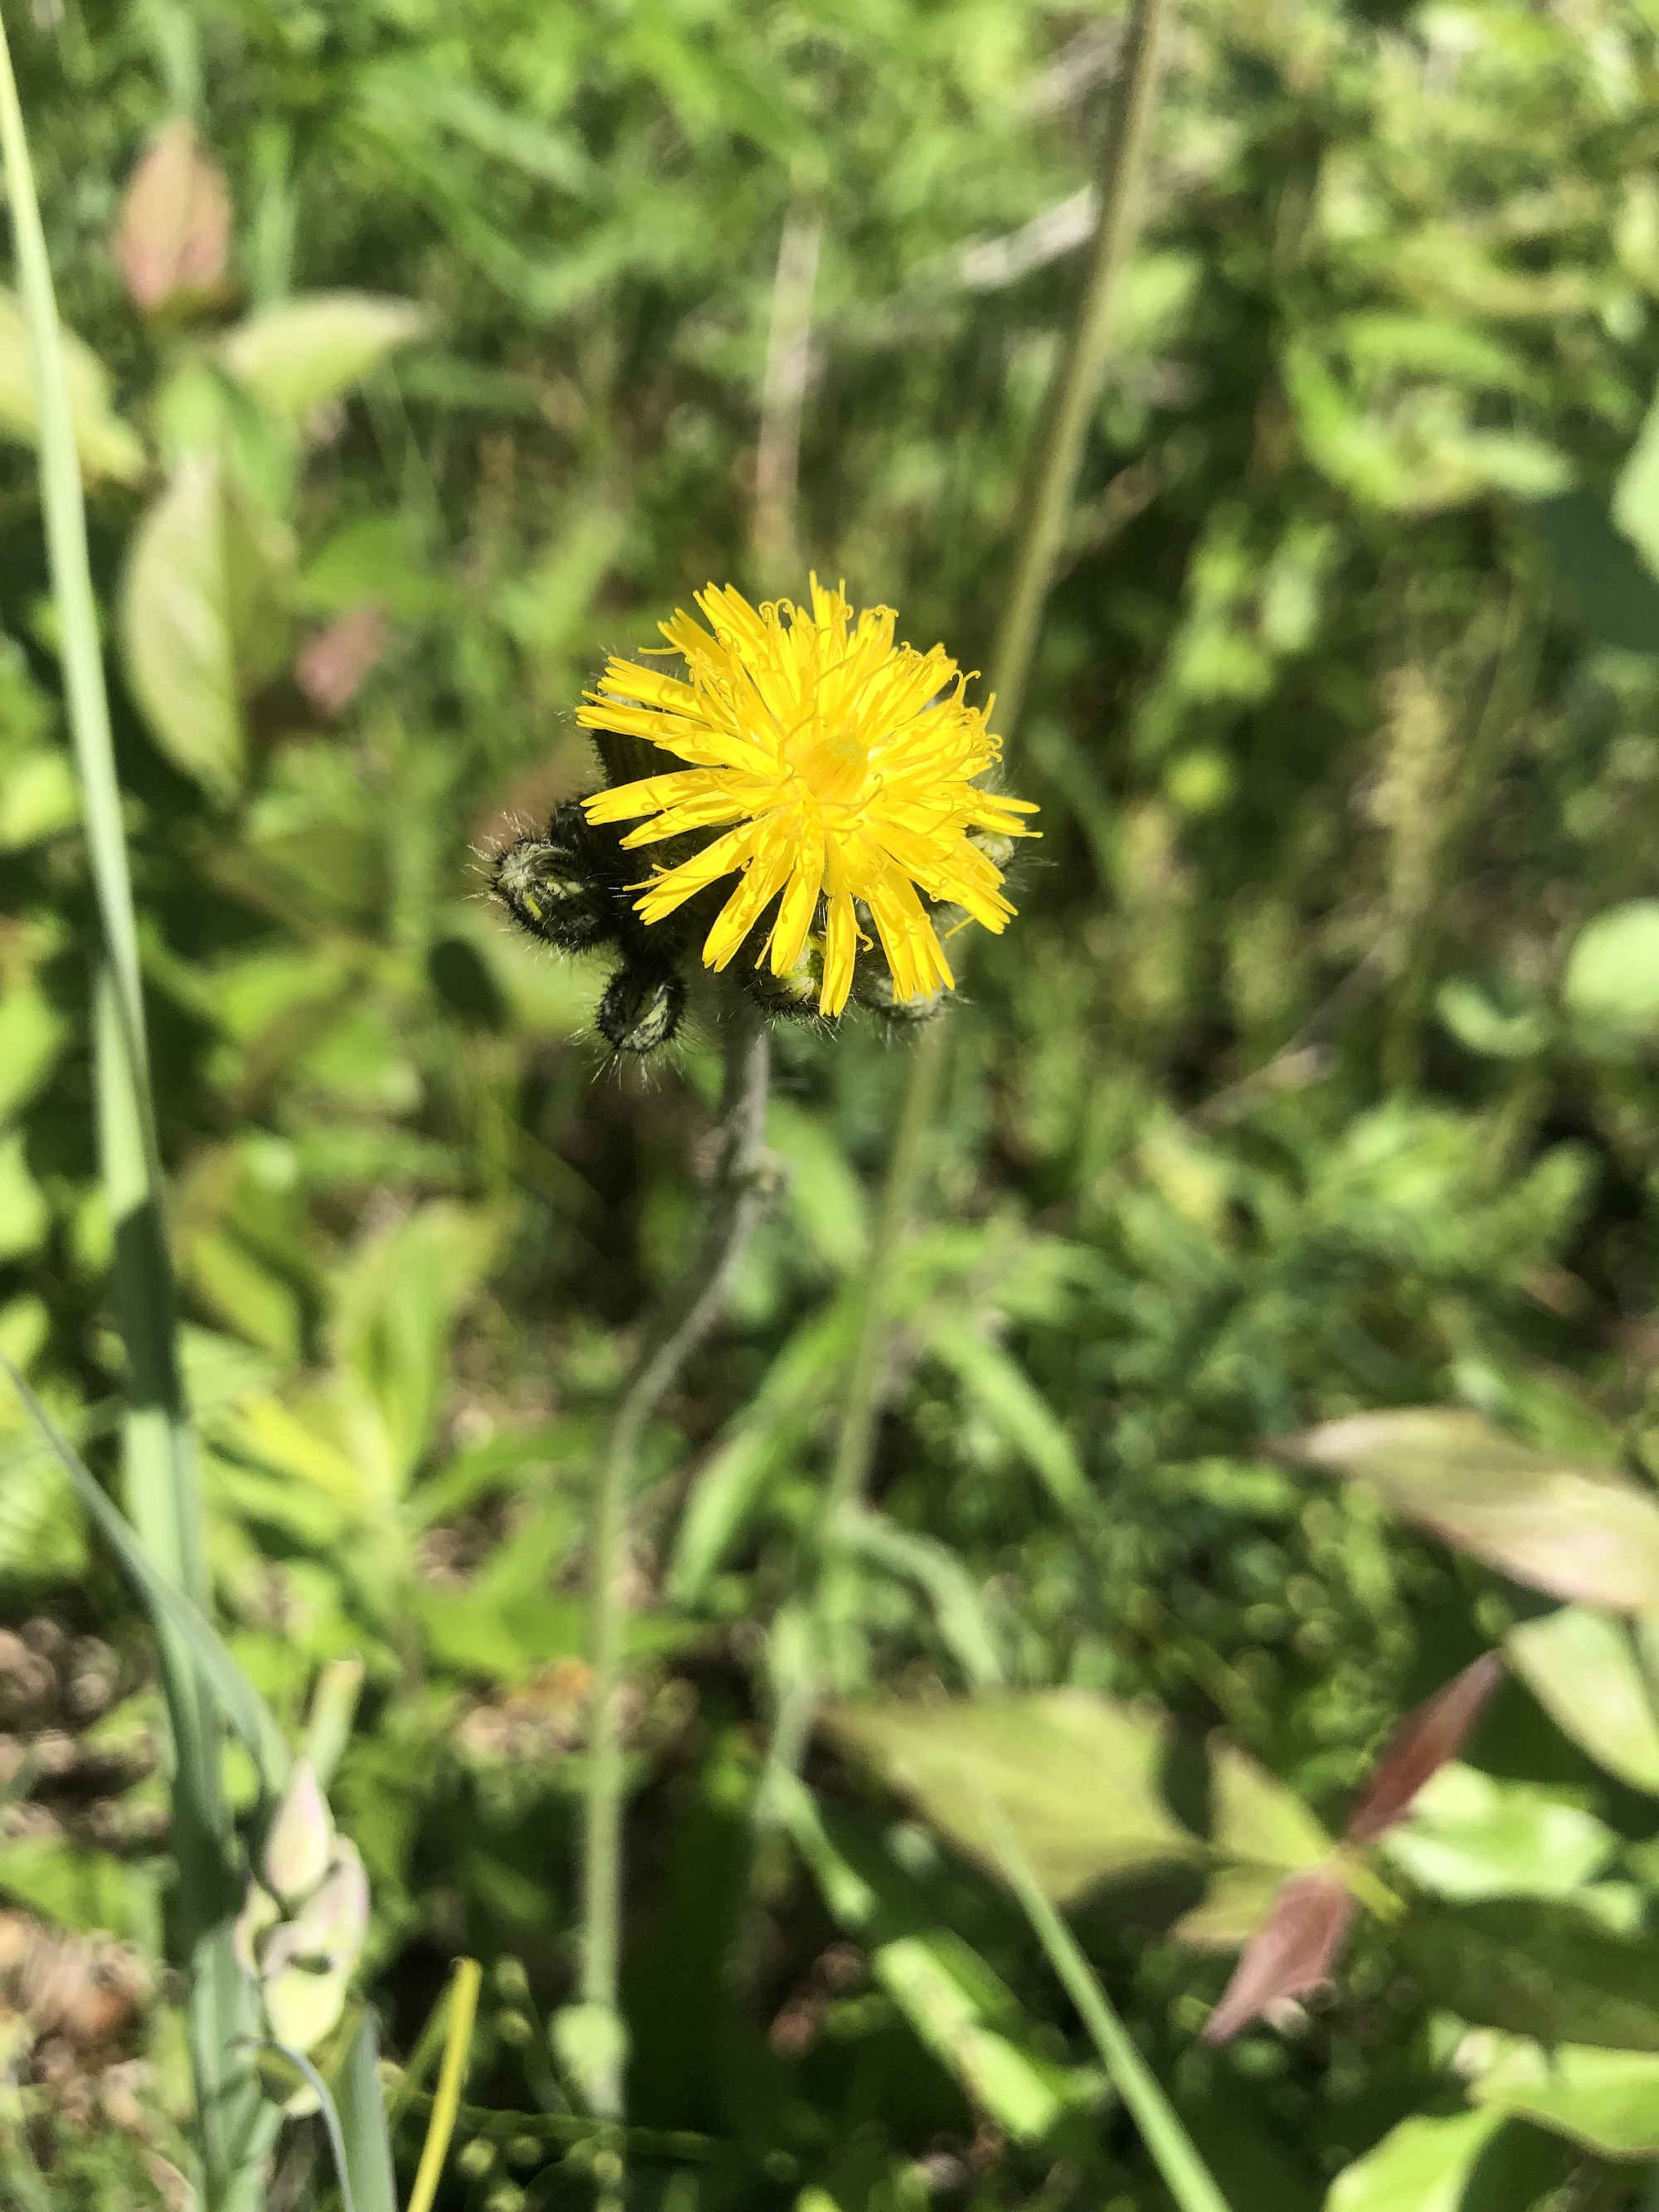 Meadow Hawkweed leaves and stem in the Curtis Prairie in the University of Wisconsin-Madison Arboretum in Madison, Wisconsin on June 9, 2022.